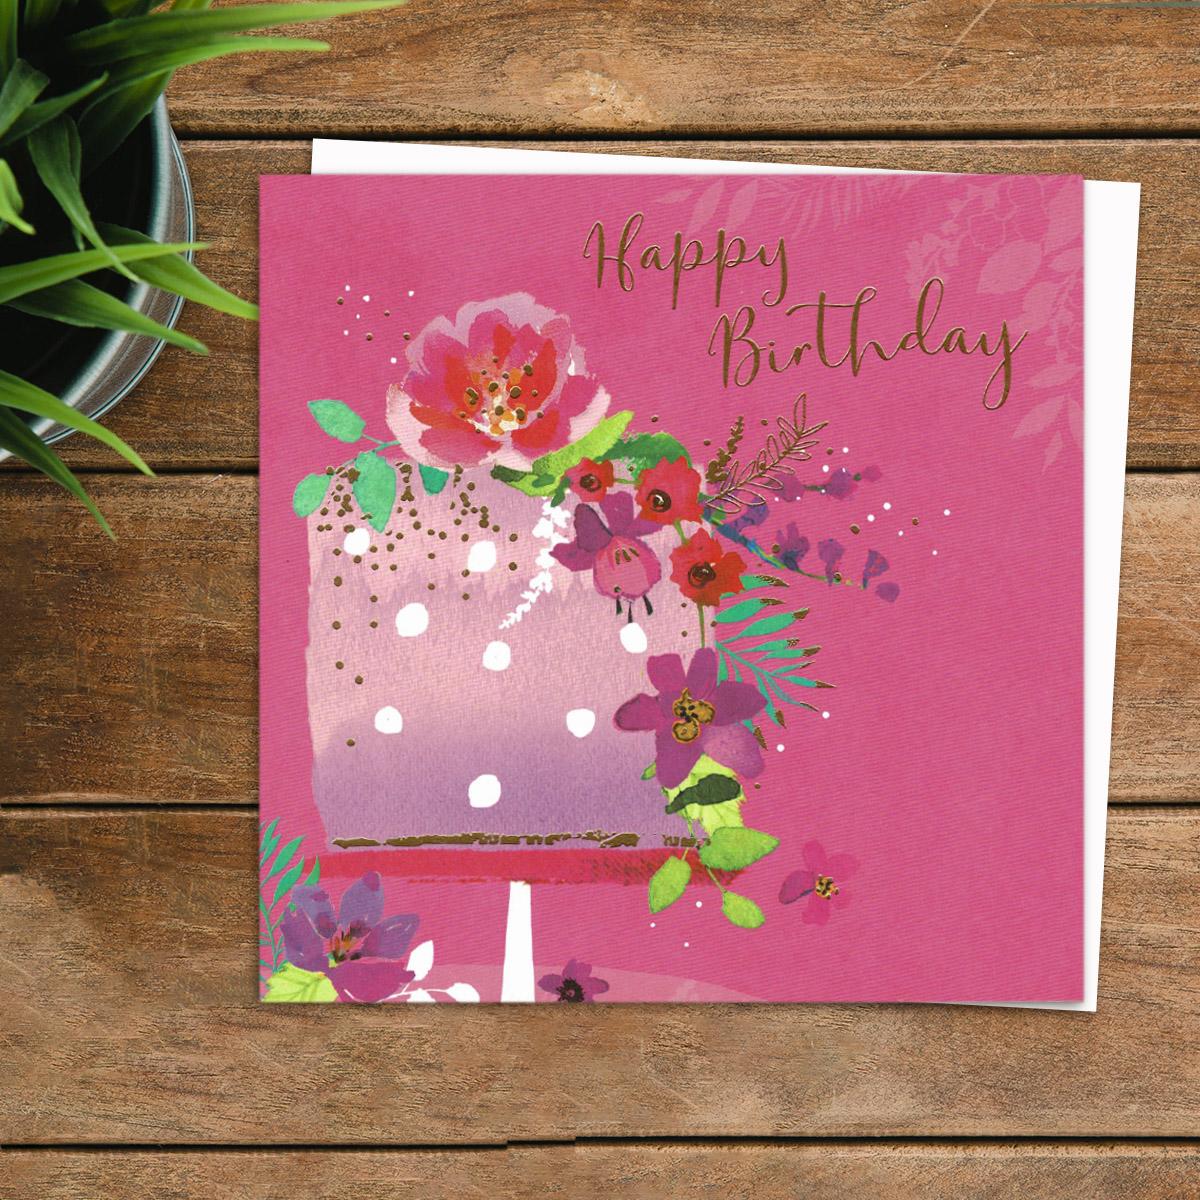 Damson Noire - Happy Birthday Cake & Flowers Card Front Image